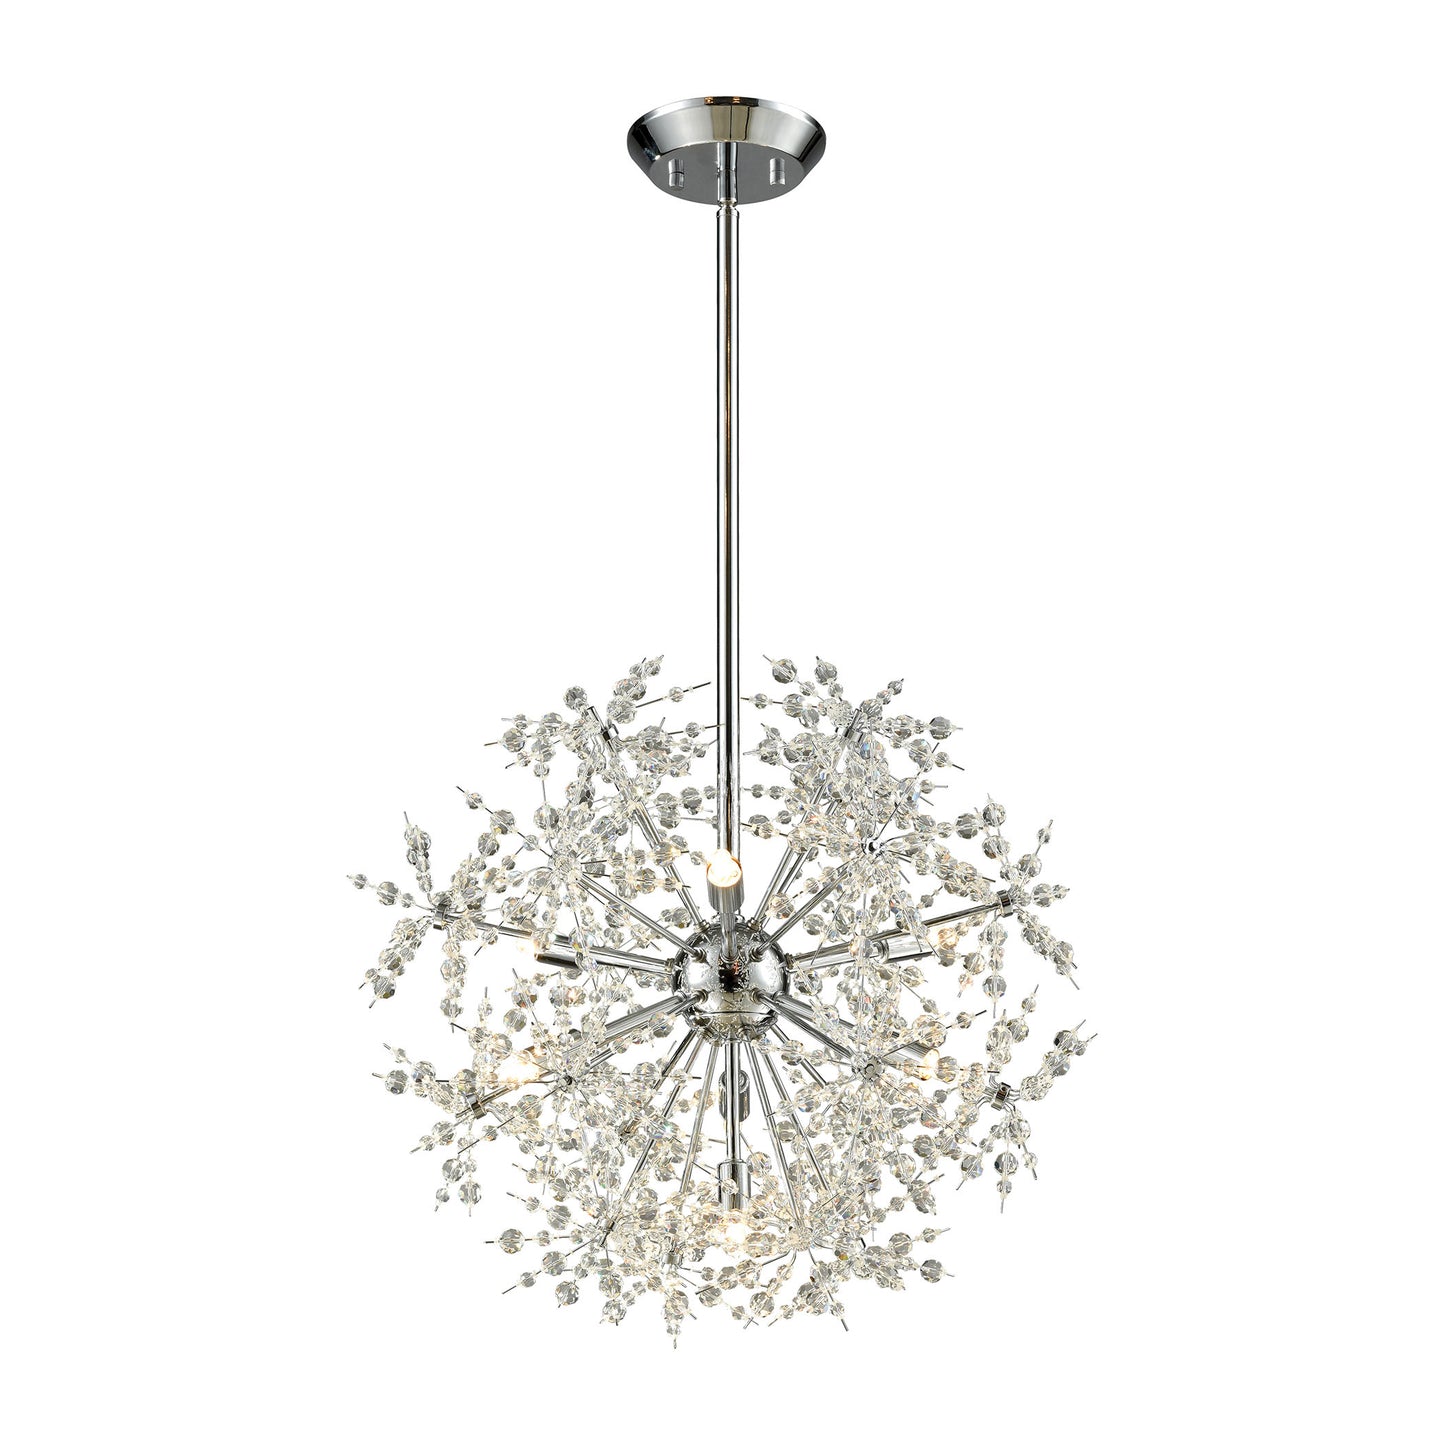 Snowburst 7-Light Chandelier in Polished Chrome with Crystal